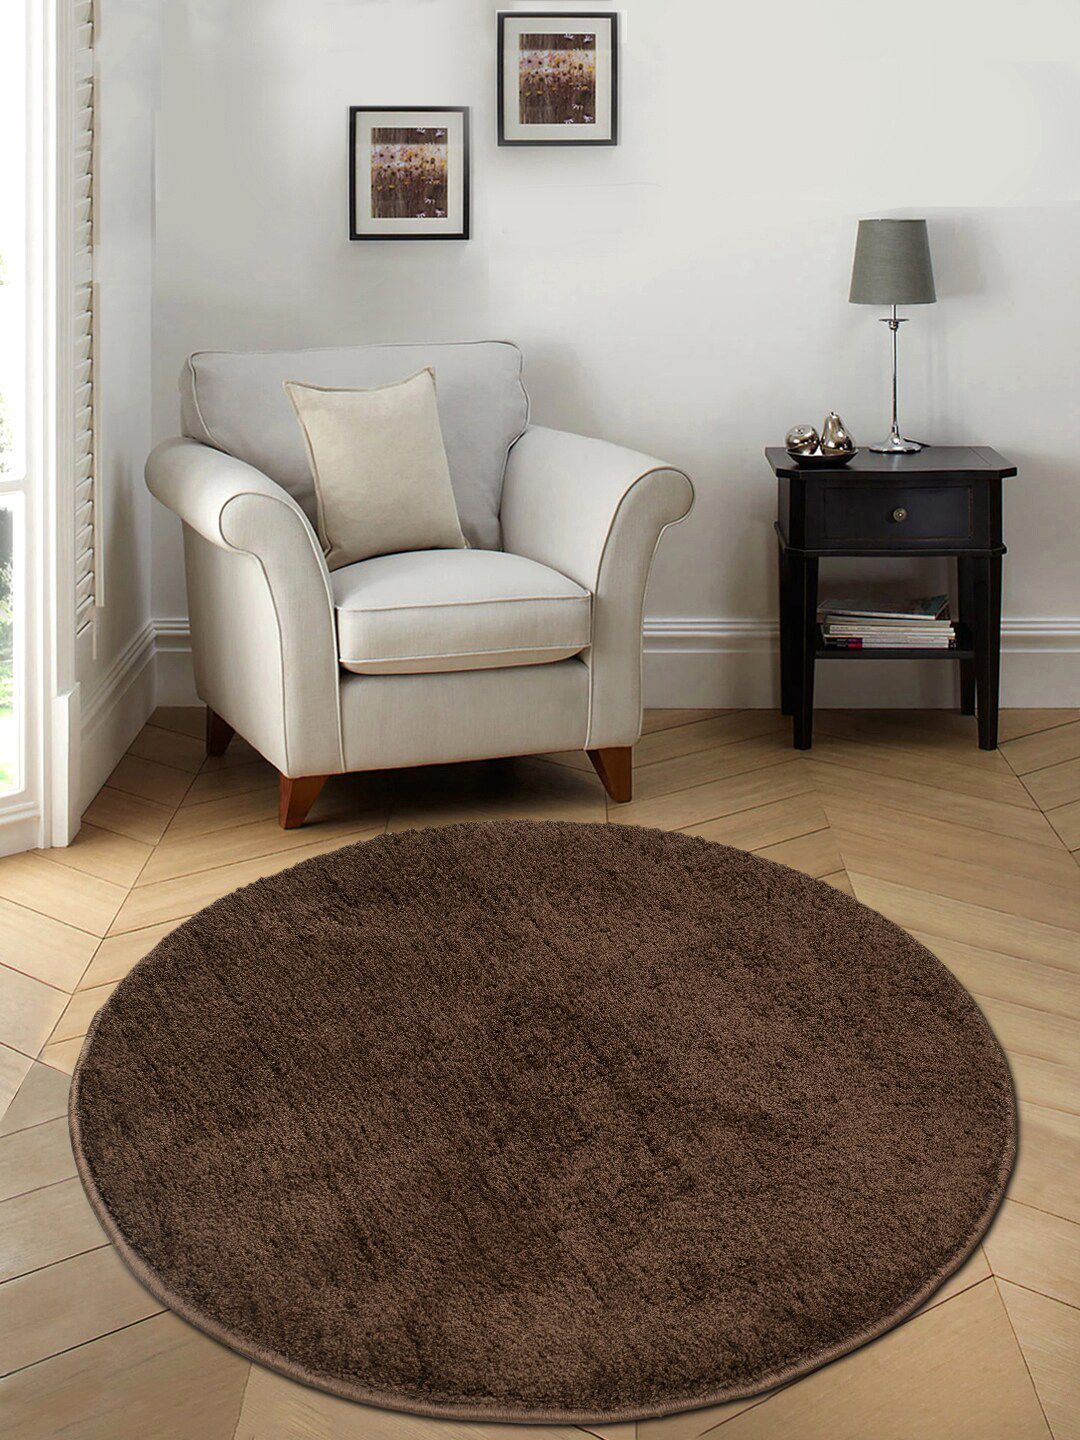 Saral Home Brown Solid Anti-Skid Round Cotton Floor Mats Price in India